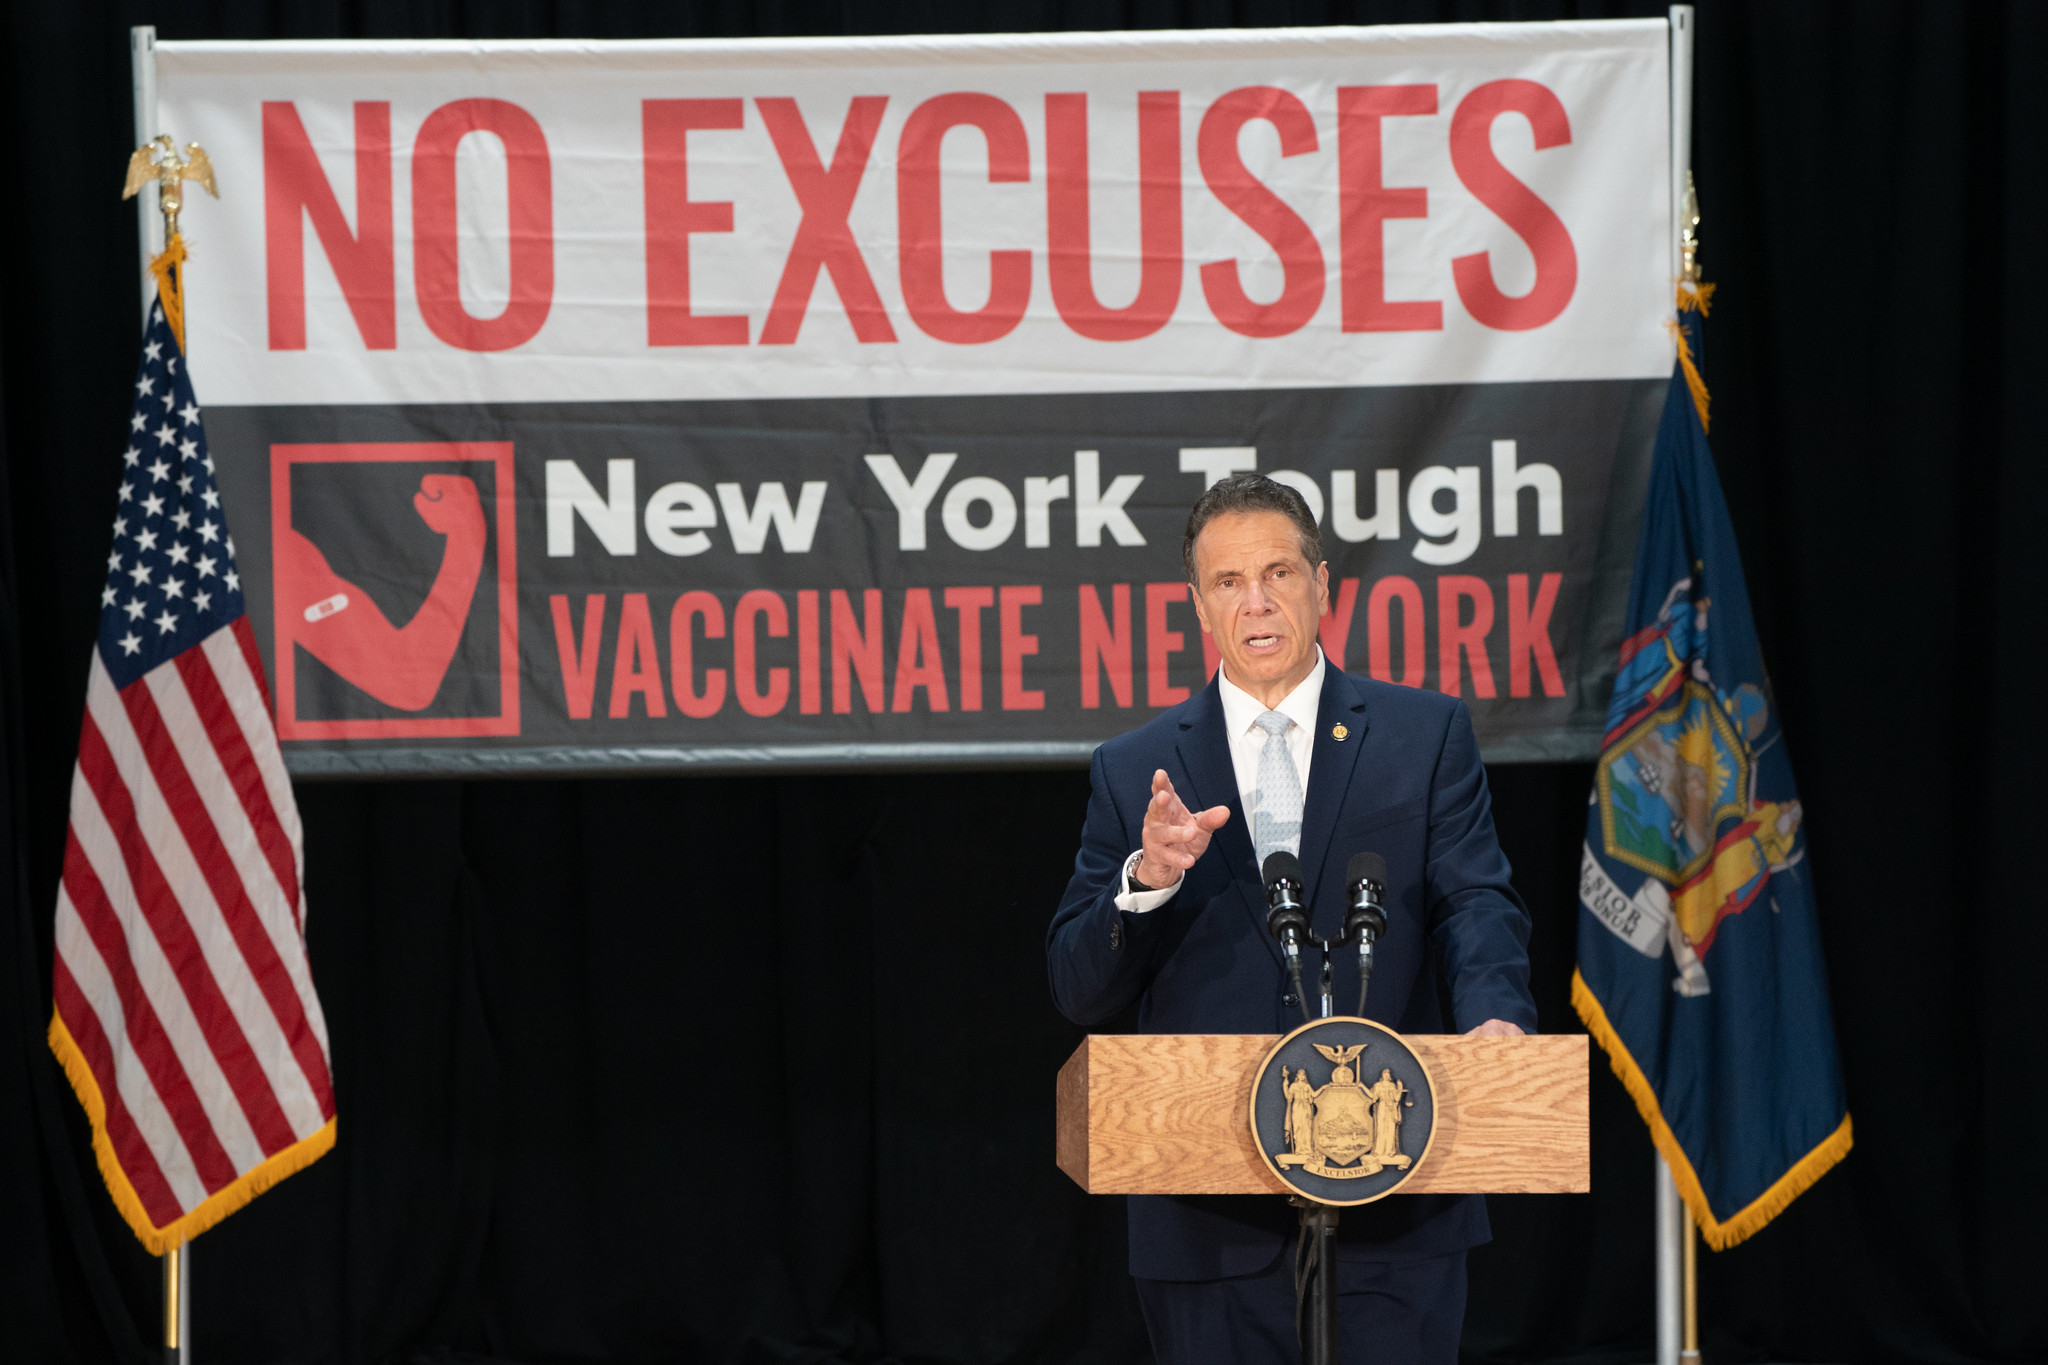 Gov. Andrew Cuomo on Friday announces 16 mass-vaccination sites will accept walk-in appointments for individuals age 60 and older. New York state will set aside a vaccine allocation to facilitate this expanded vaccination access. (Image courtesy of the Office of Gov. Andrew M. Cuomo)